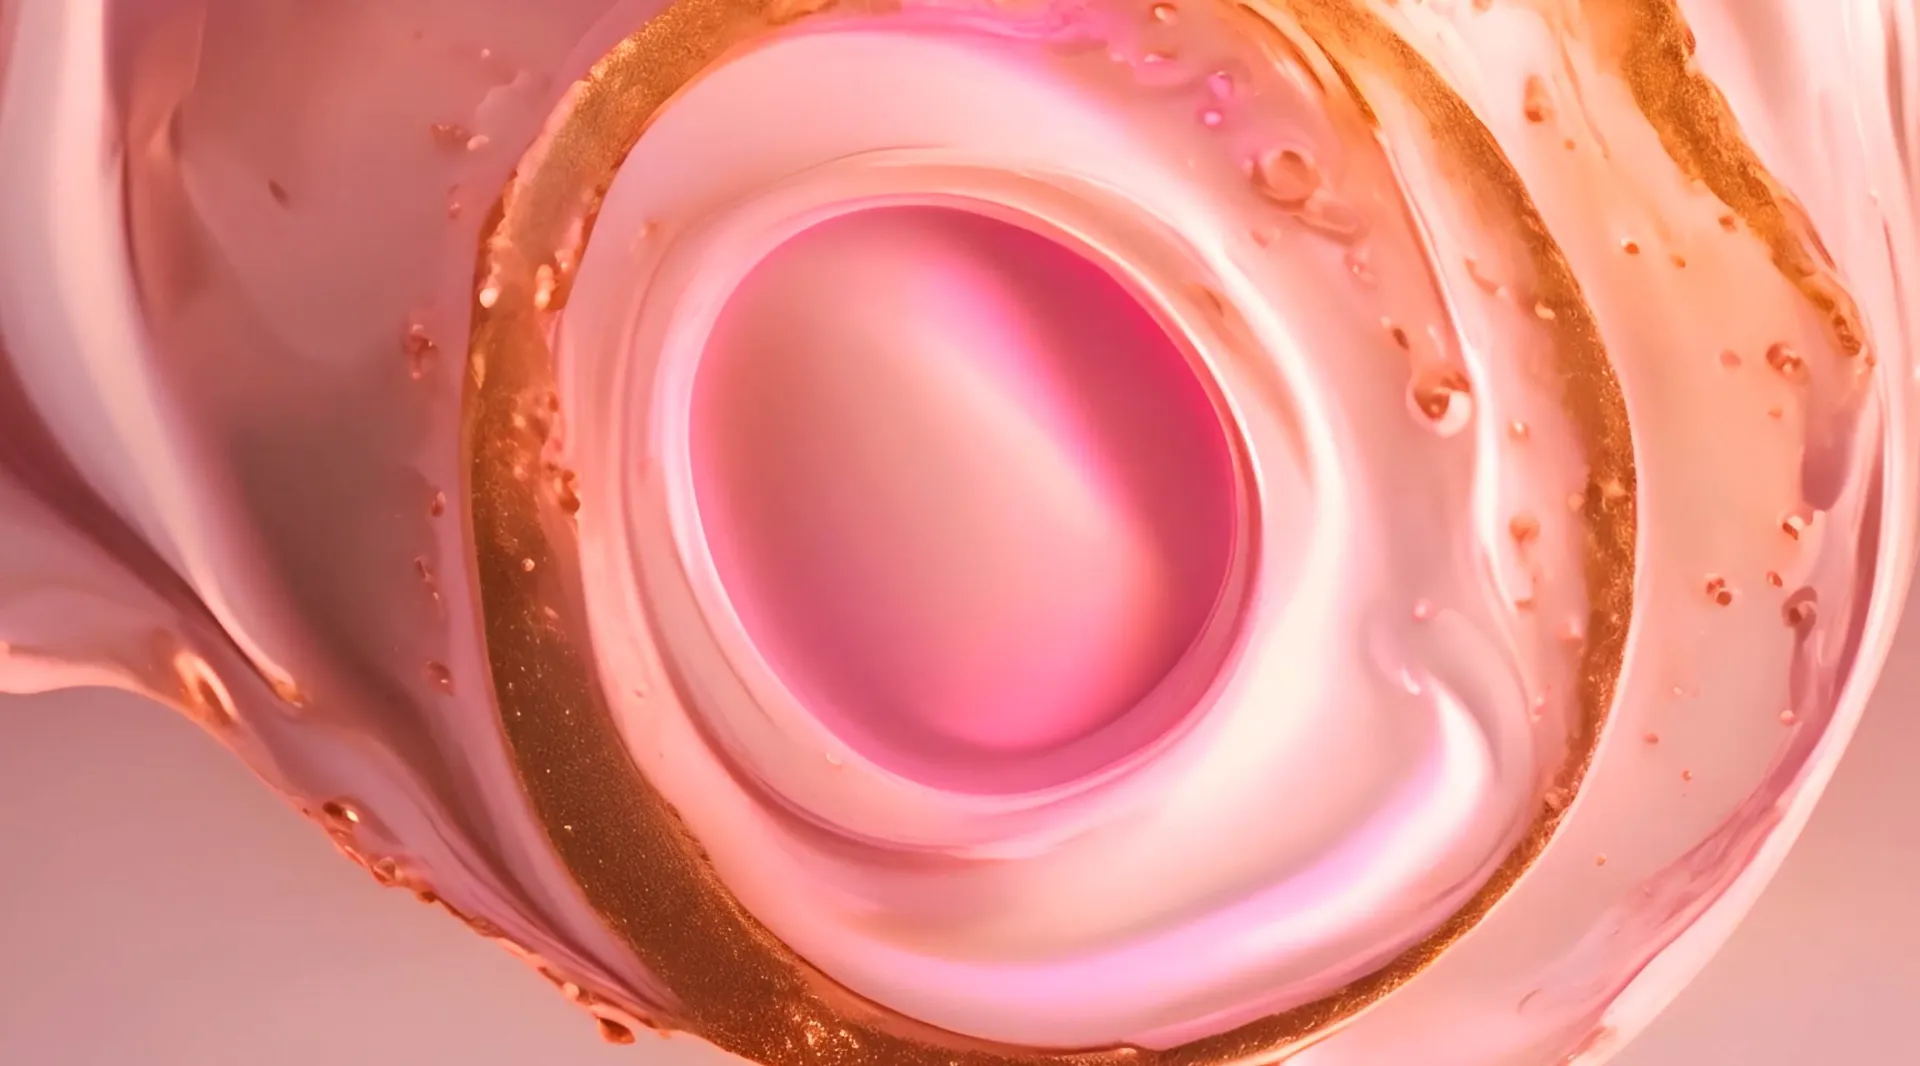 Ethereal Pink and Gold Swirl Loopable Video